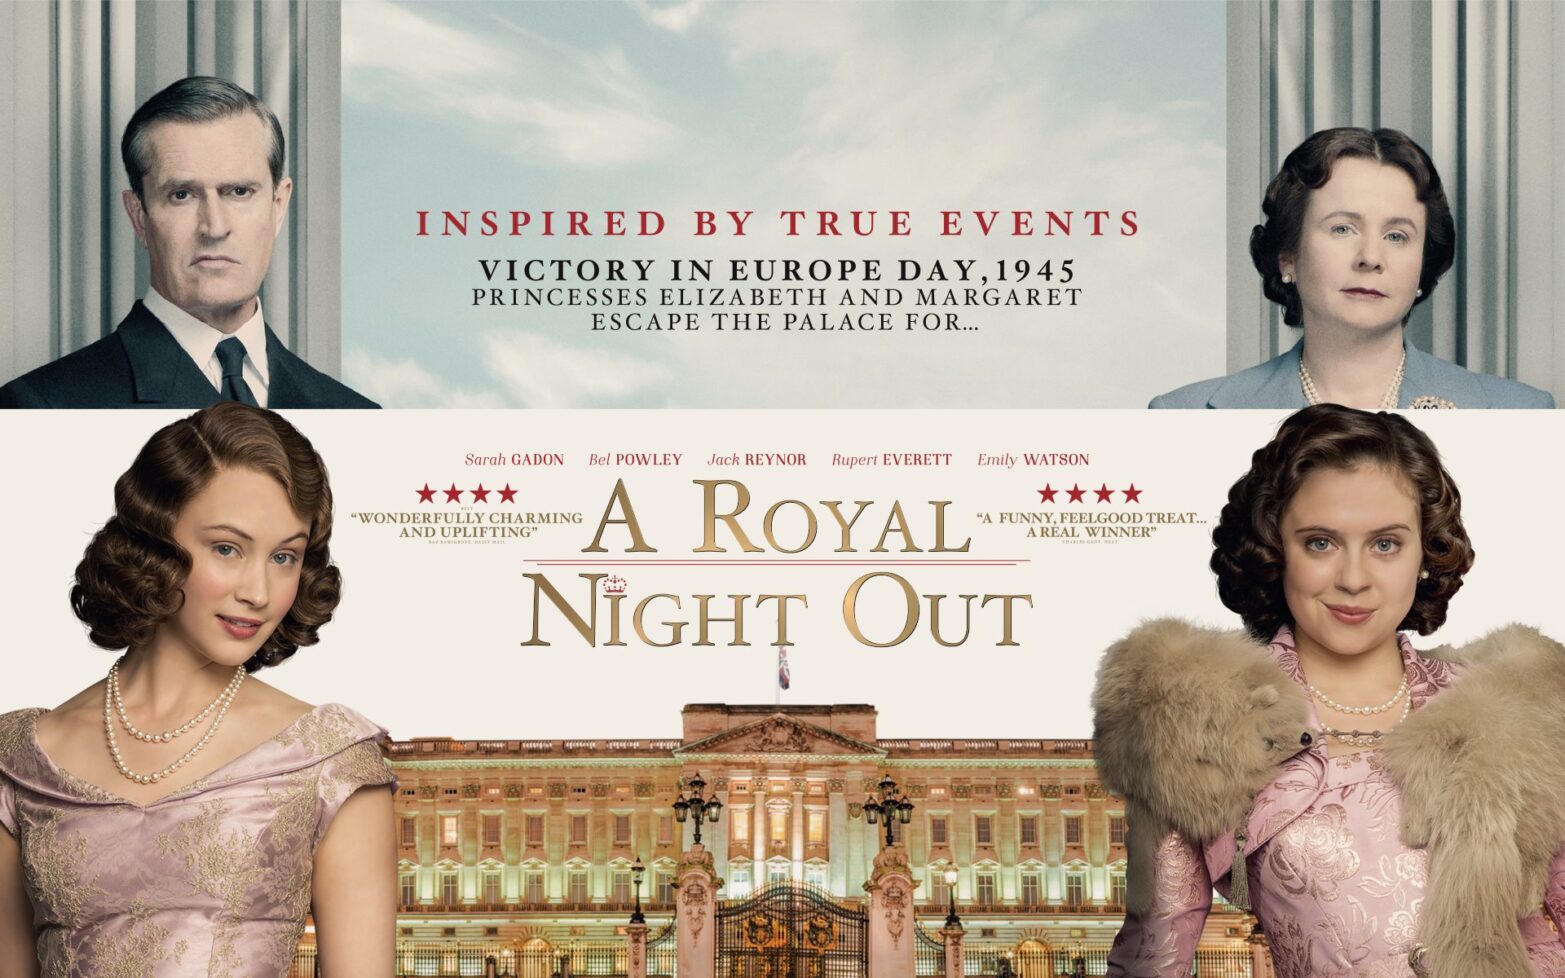 The official poster for the film "A Royal Night Out"